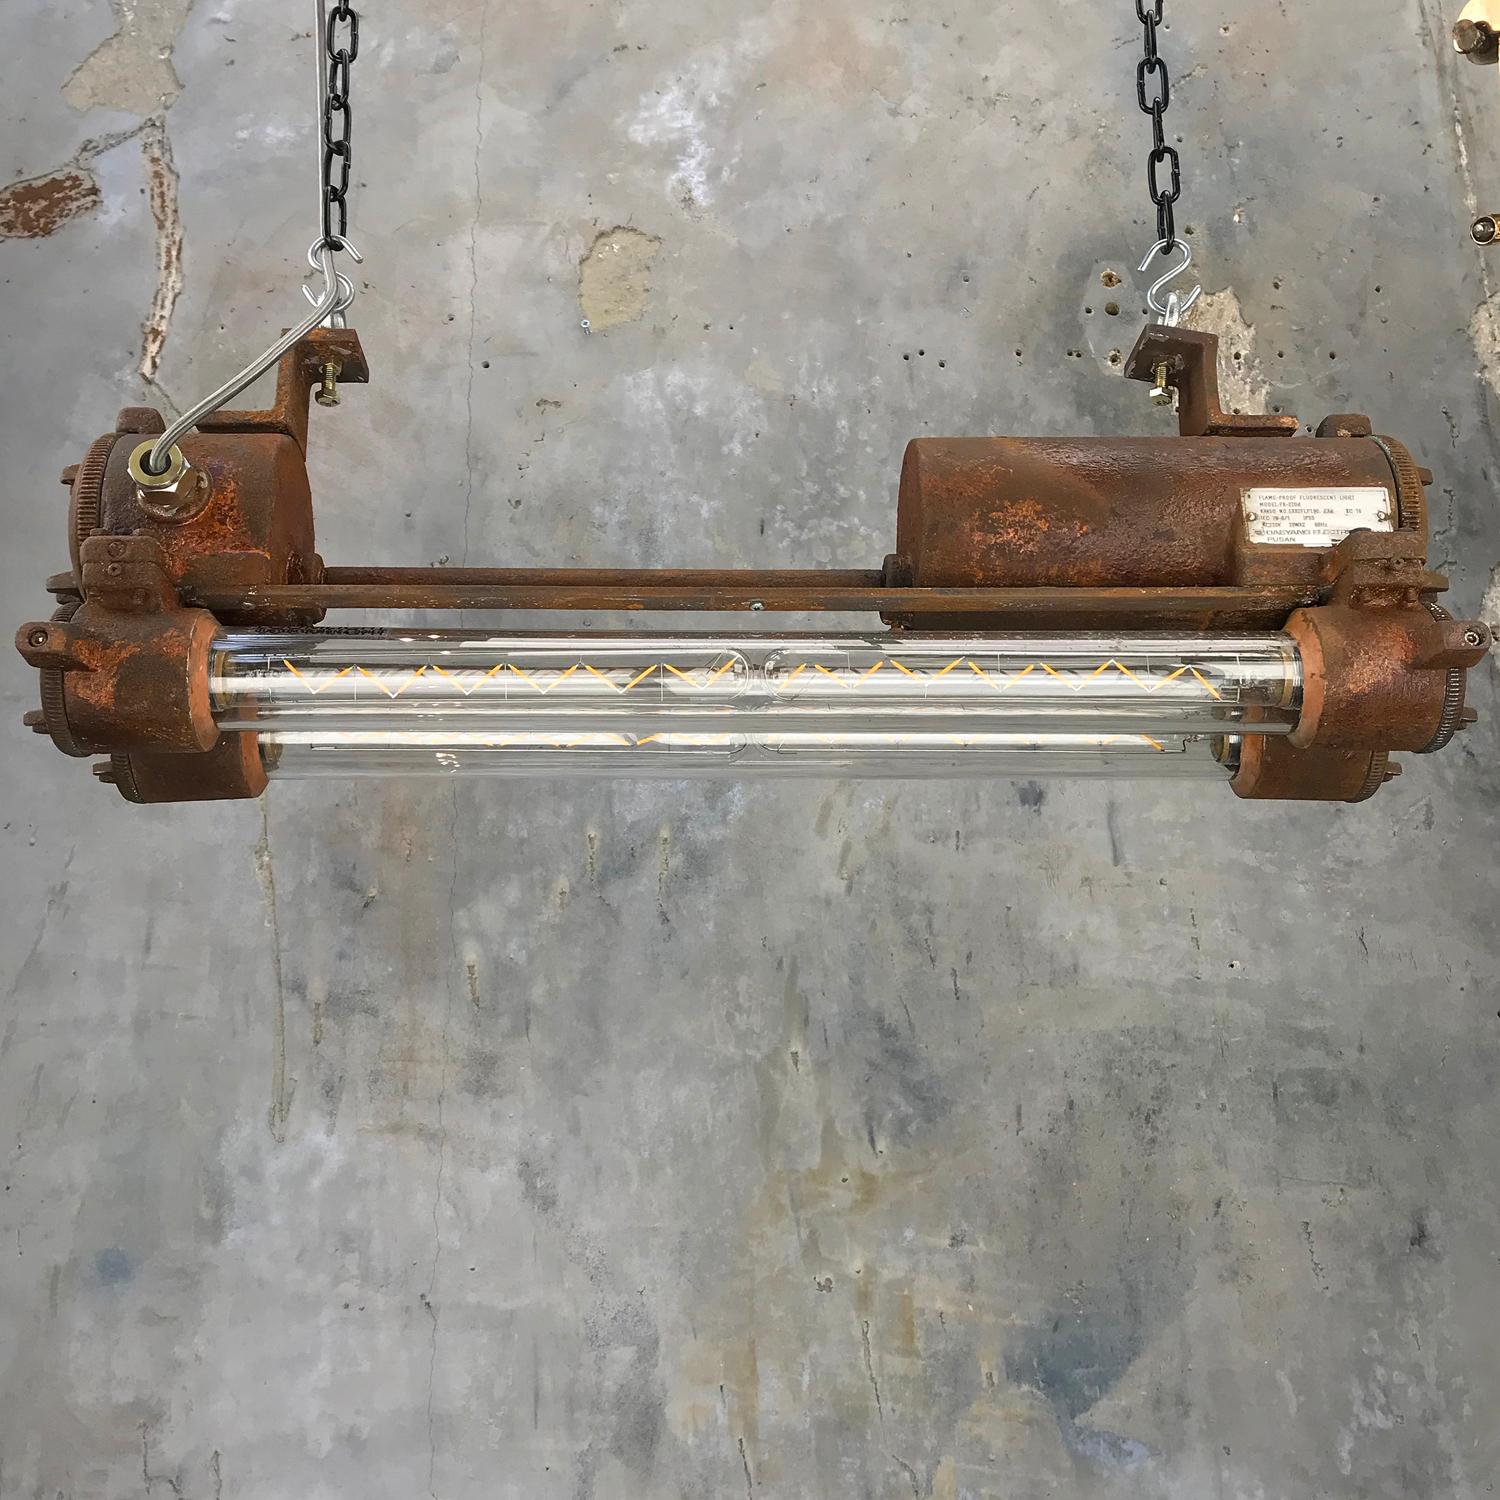 A reclaimed vintage industrial flameproof Edison tube light made by Daeyang circa 1978 with iron based rust applied finish. These fixtures are salvaged from decommissioned supertankers and military vessels then professionally restored in the UK